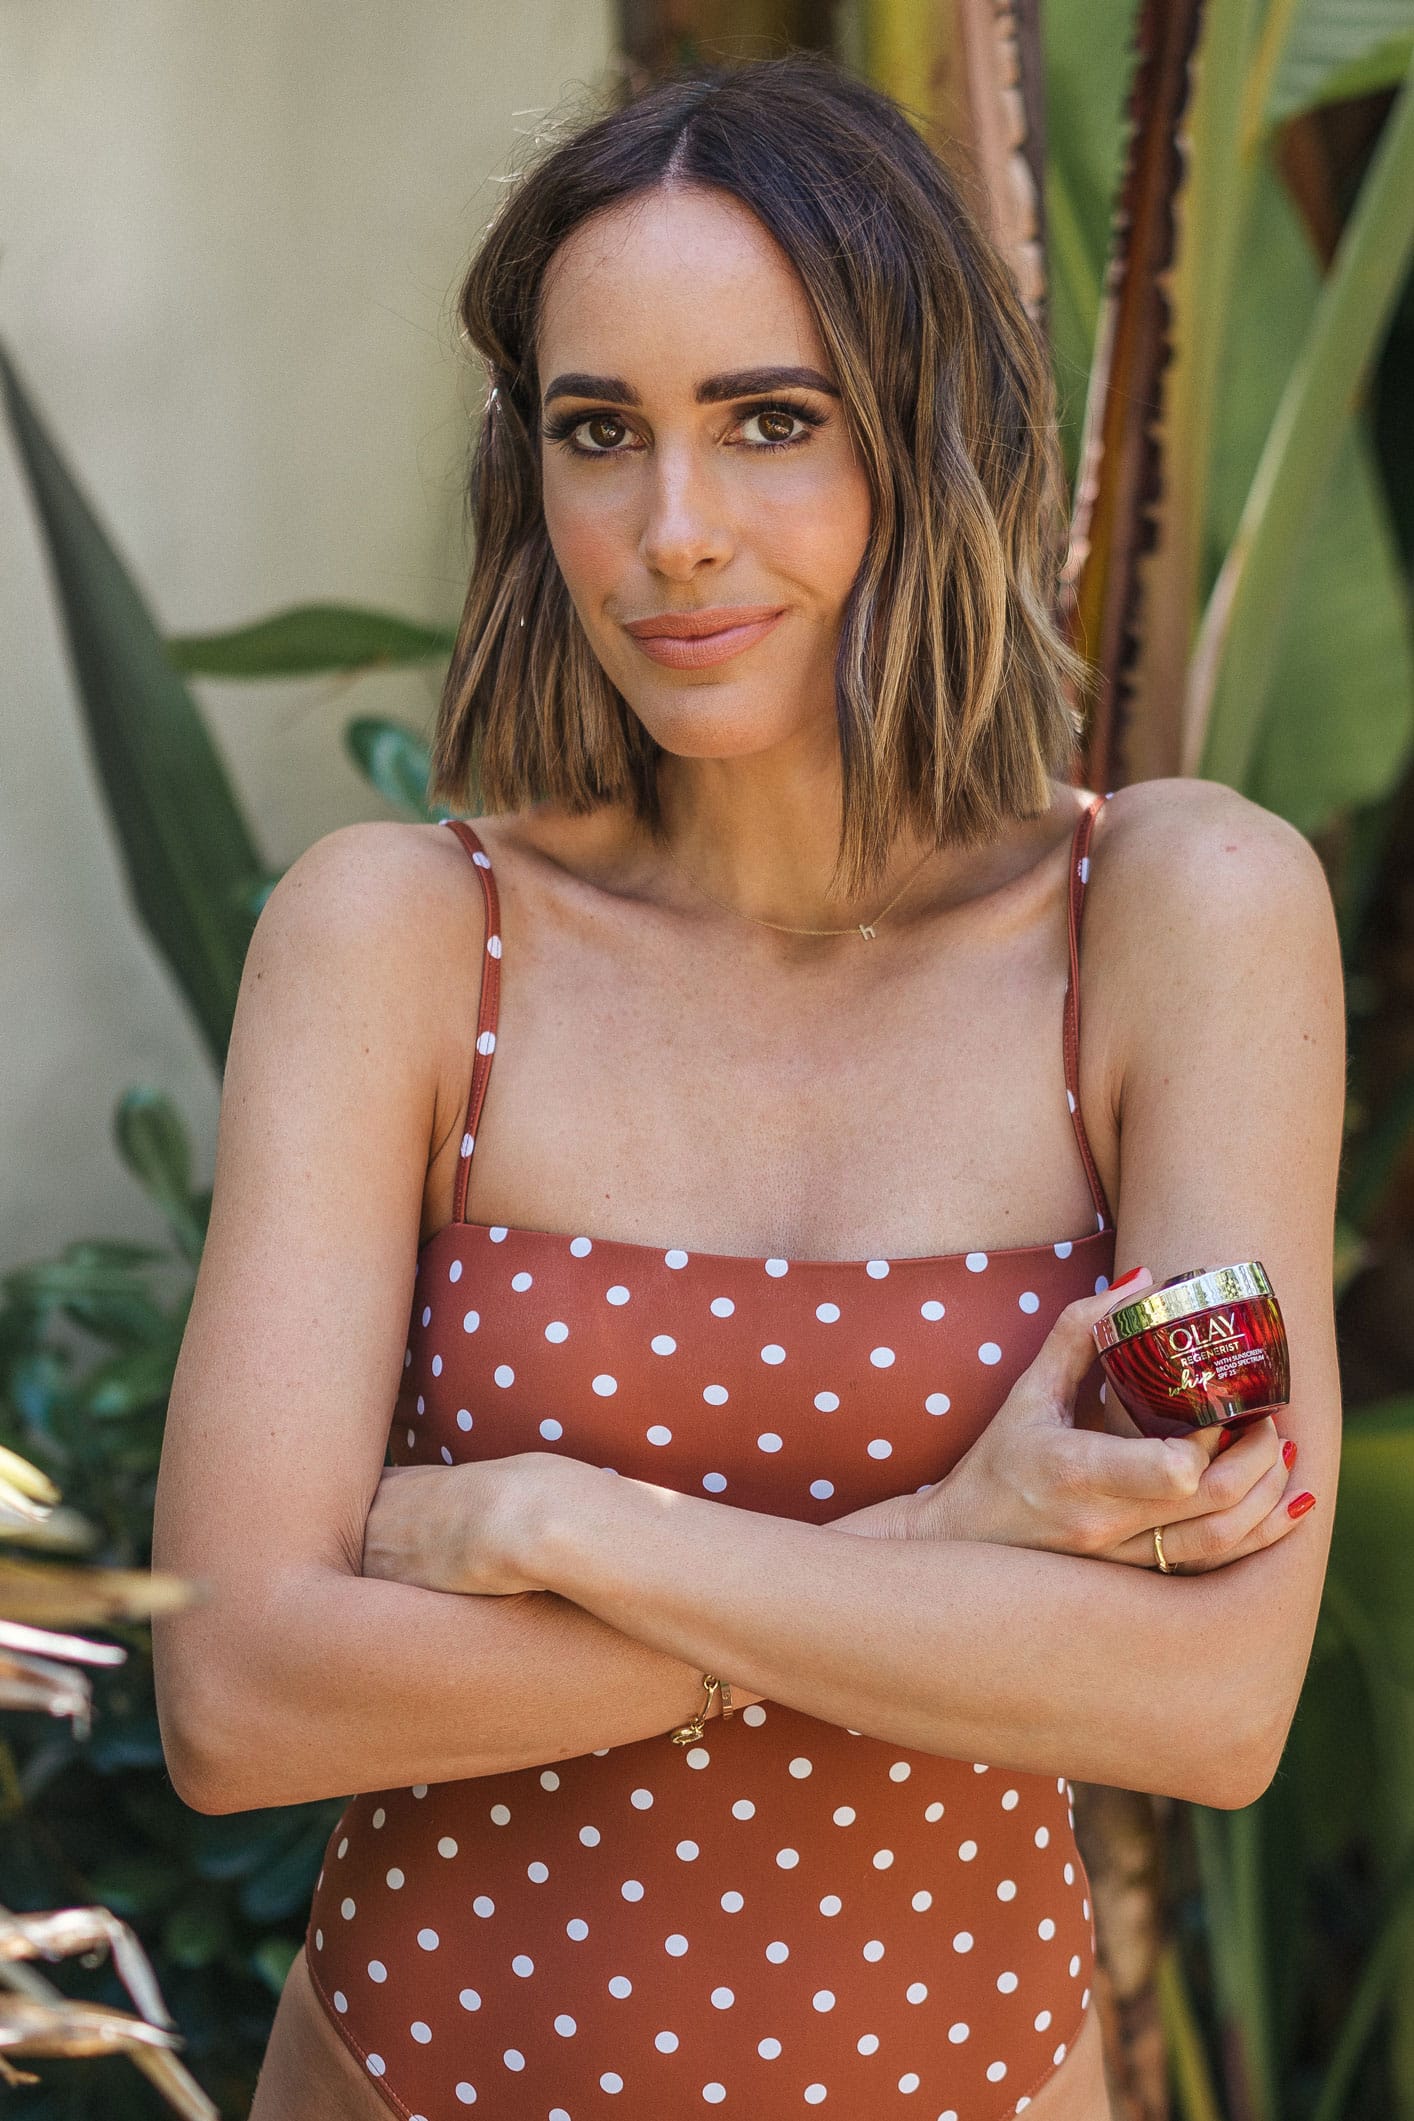 Louise Roe Skincare Tips Featuring Olay Whips SPF moisturizer